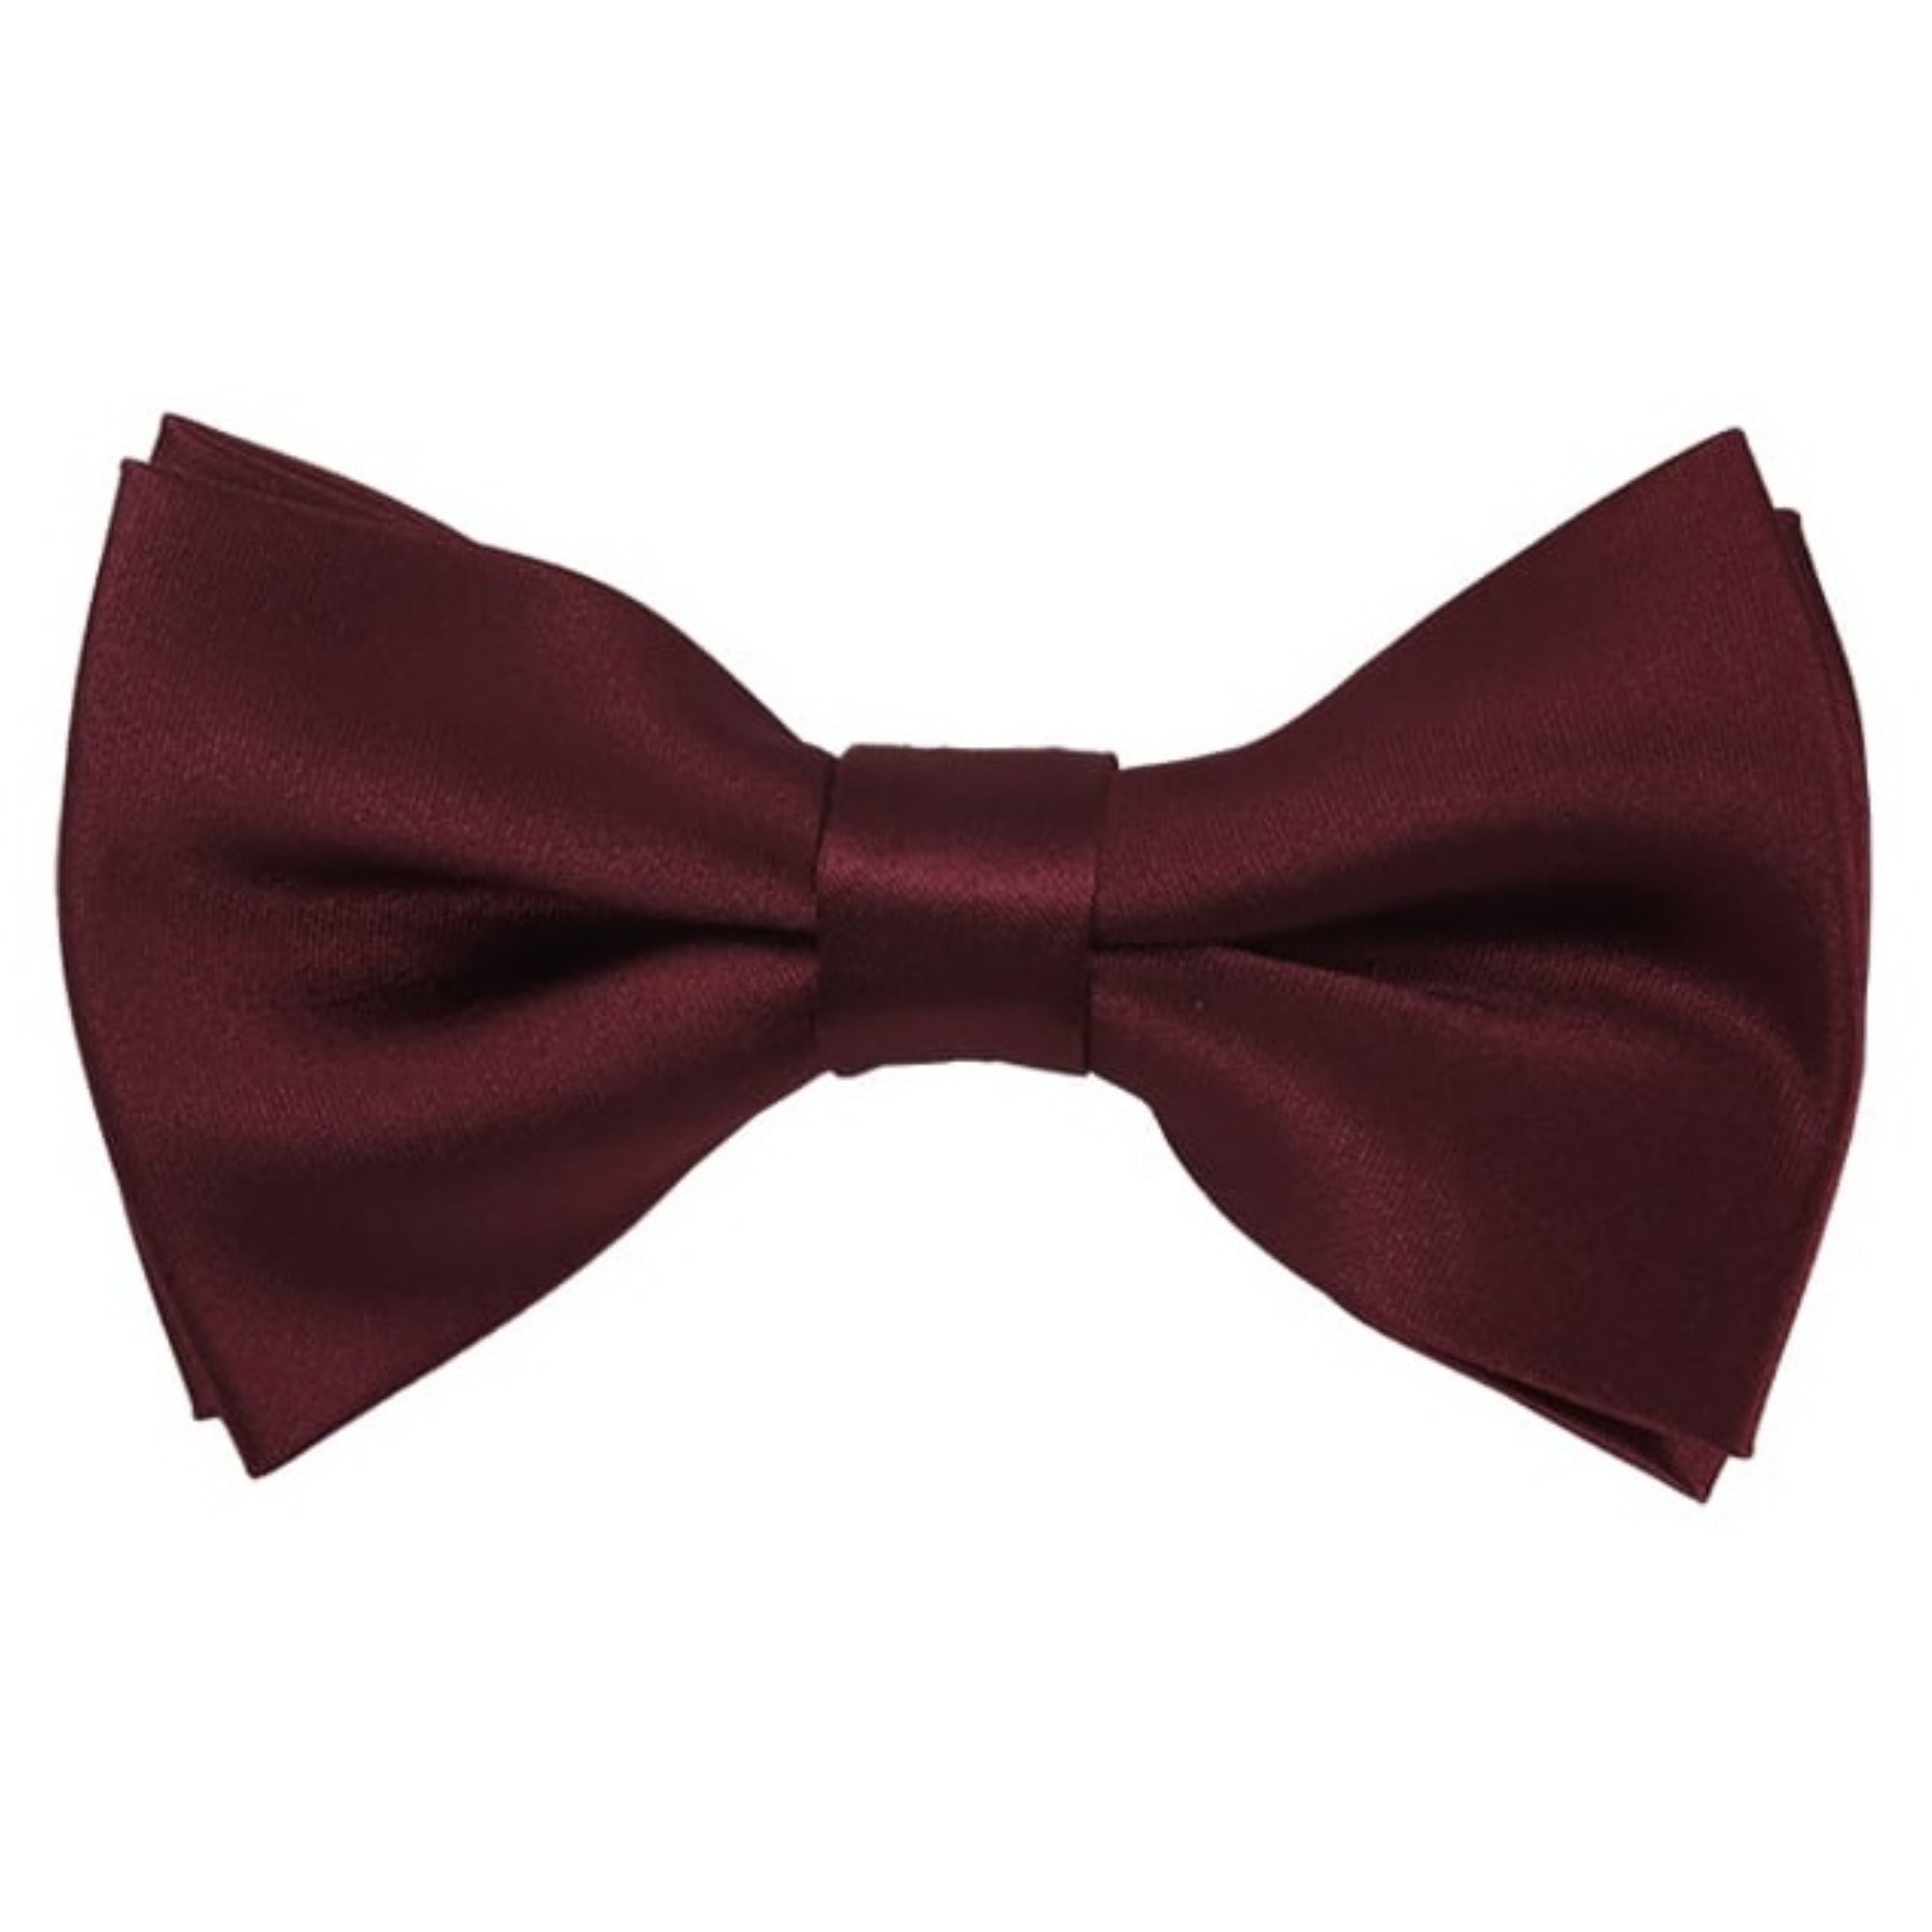 TheDapperTie Men's Solid Color 2.5 W And 4.5 L Inch Pre-Tied adjustable Bow Ties Men's Solid Color Bow Tie TheDapperTie Maroon  